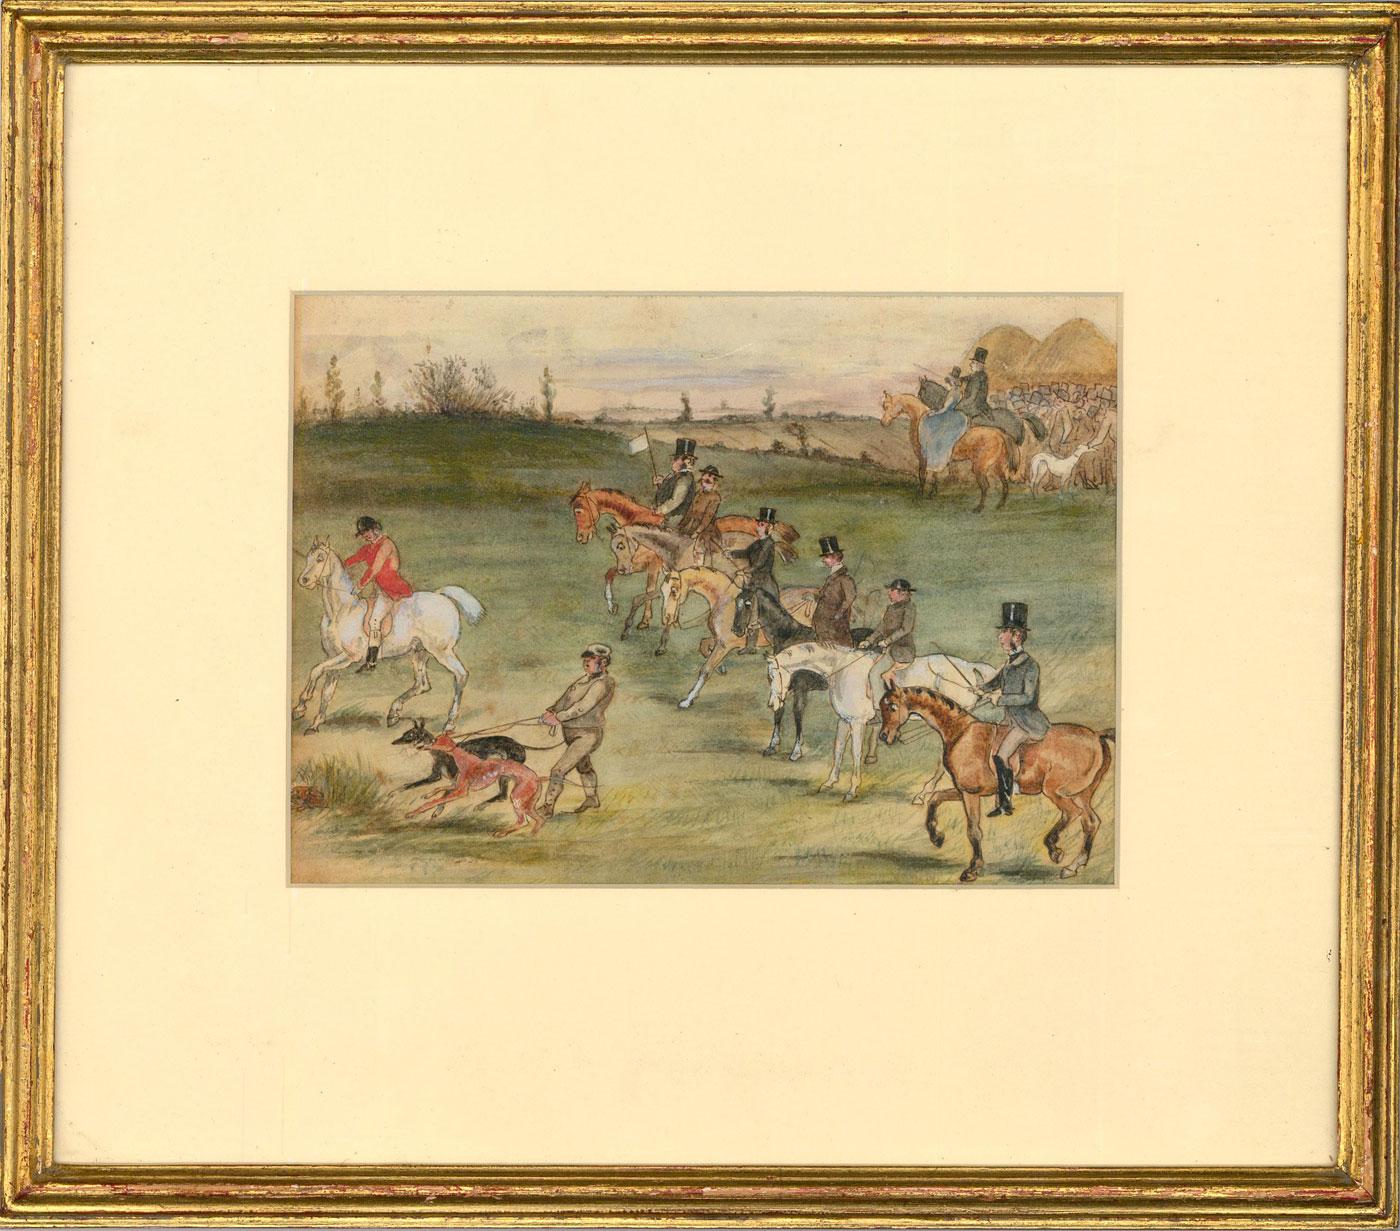 Unknown Animal Art - 19th Century Watercolour - Towing the Line